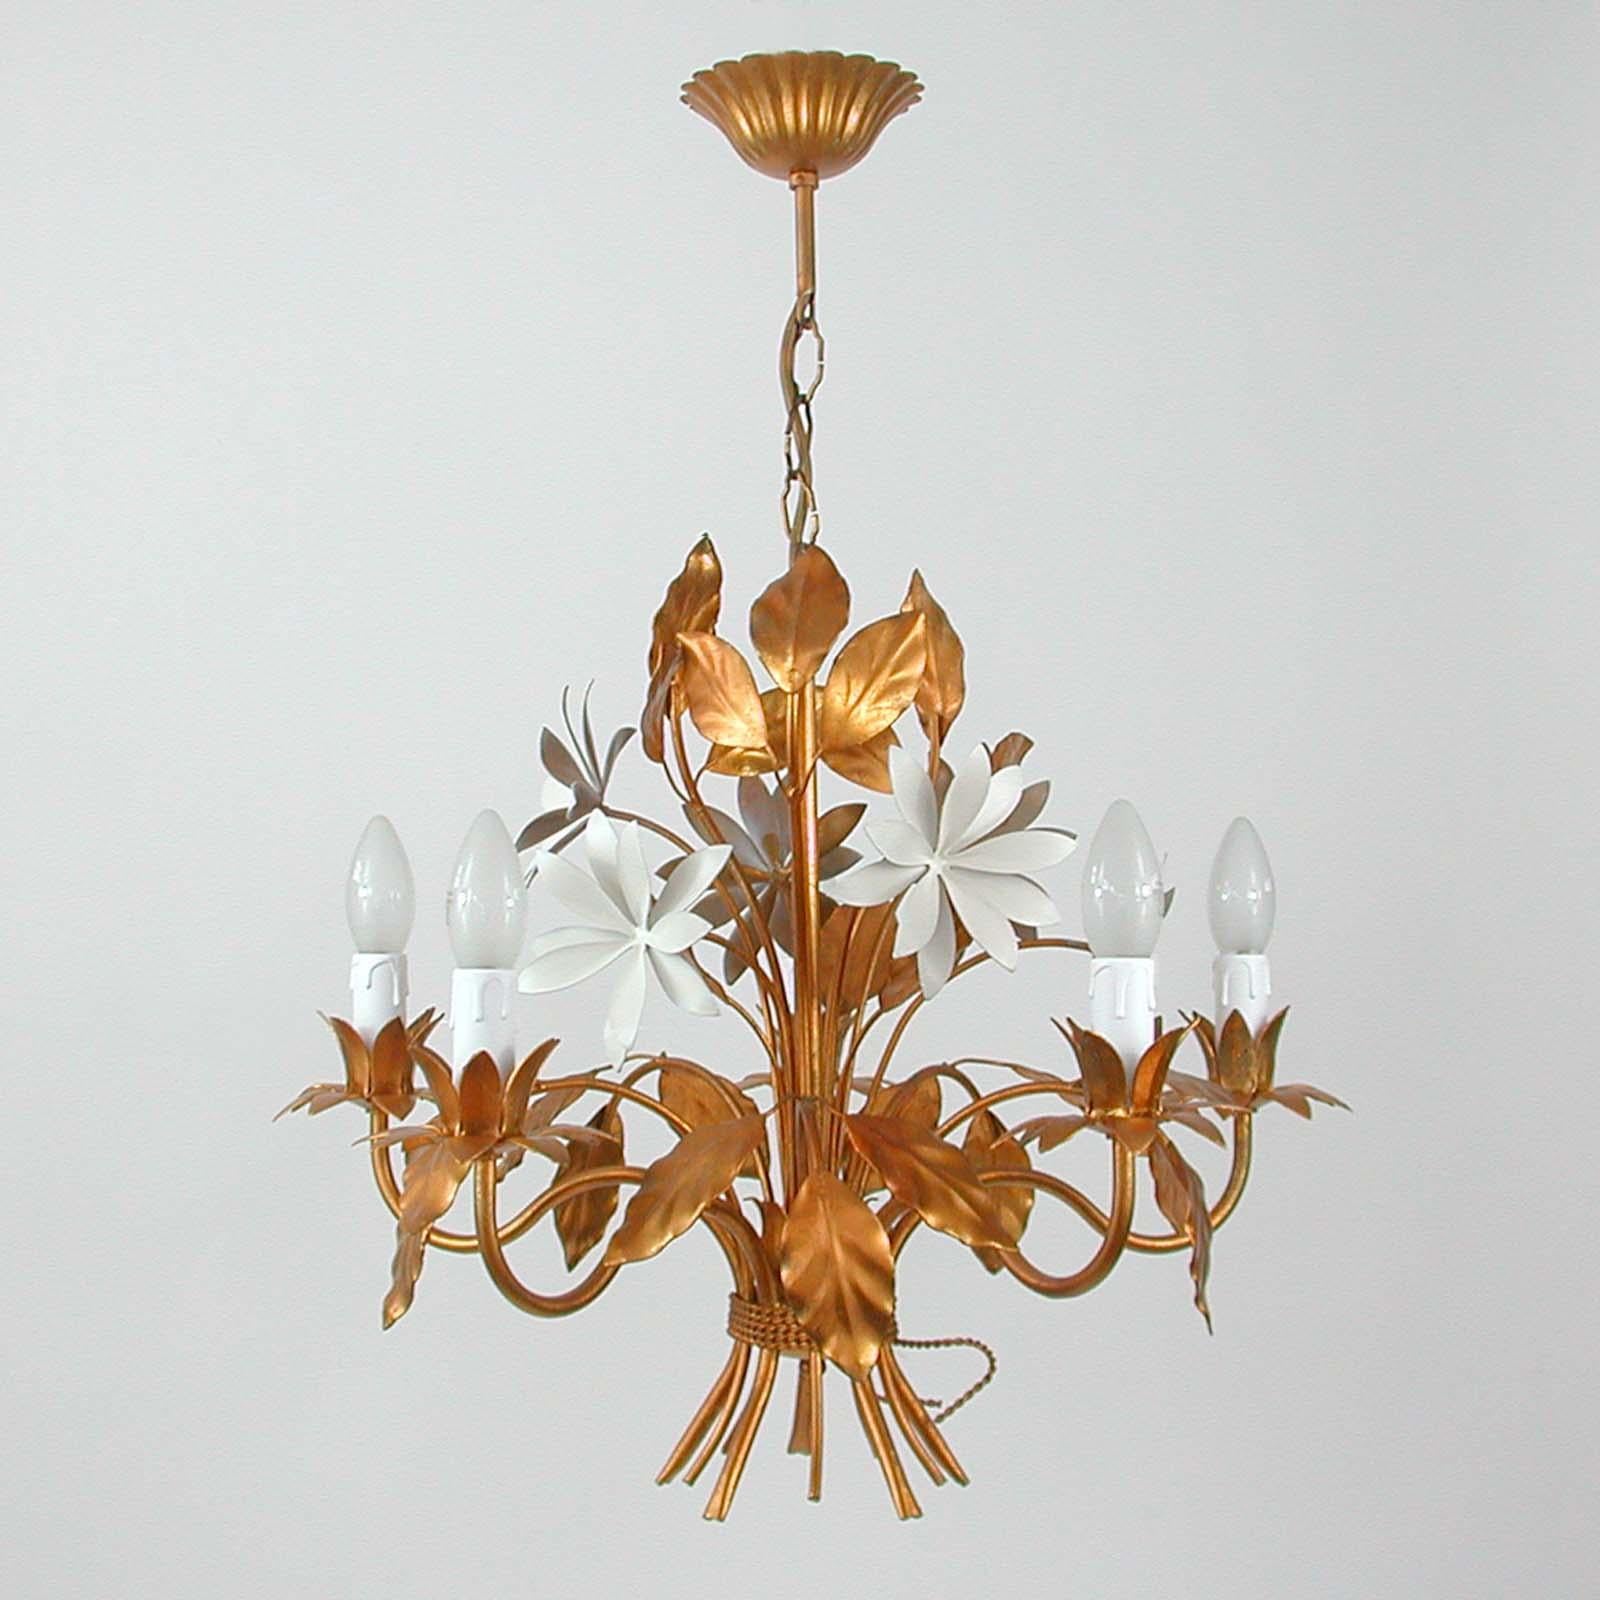 This beautiful gilt chandelier was designed and manufactured in Germany in the 1970s by Hans Kögl Leuchten. It features 5 lights and is made of antique gold-plated metal and off-white lacquered blossoms. 

Kögls designs were inspired by natural